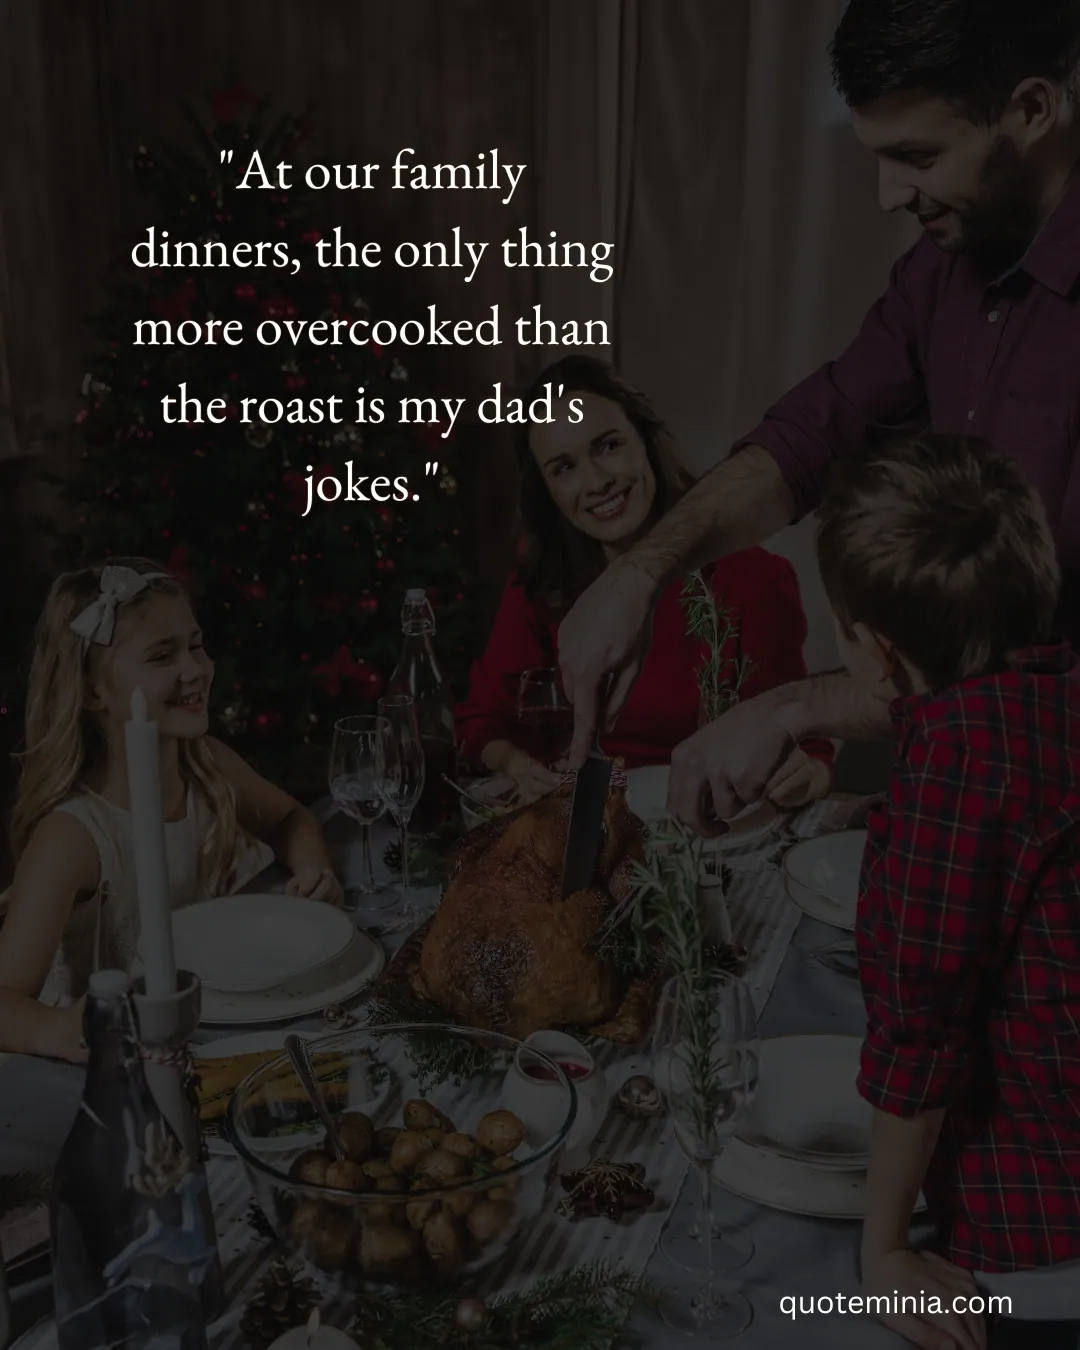 Funny Family Dinner Quotes 1